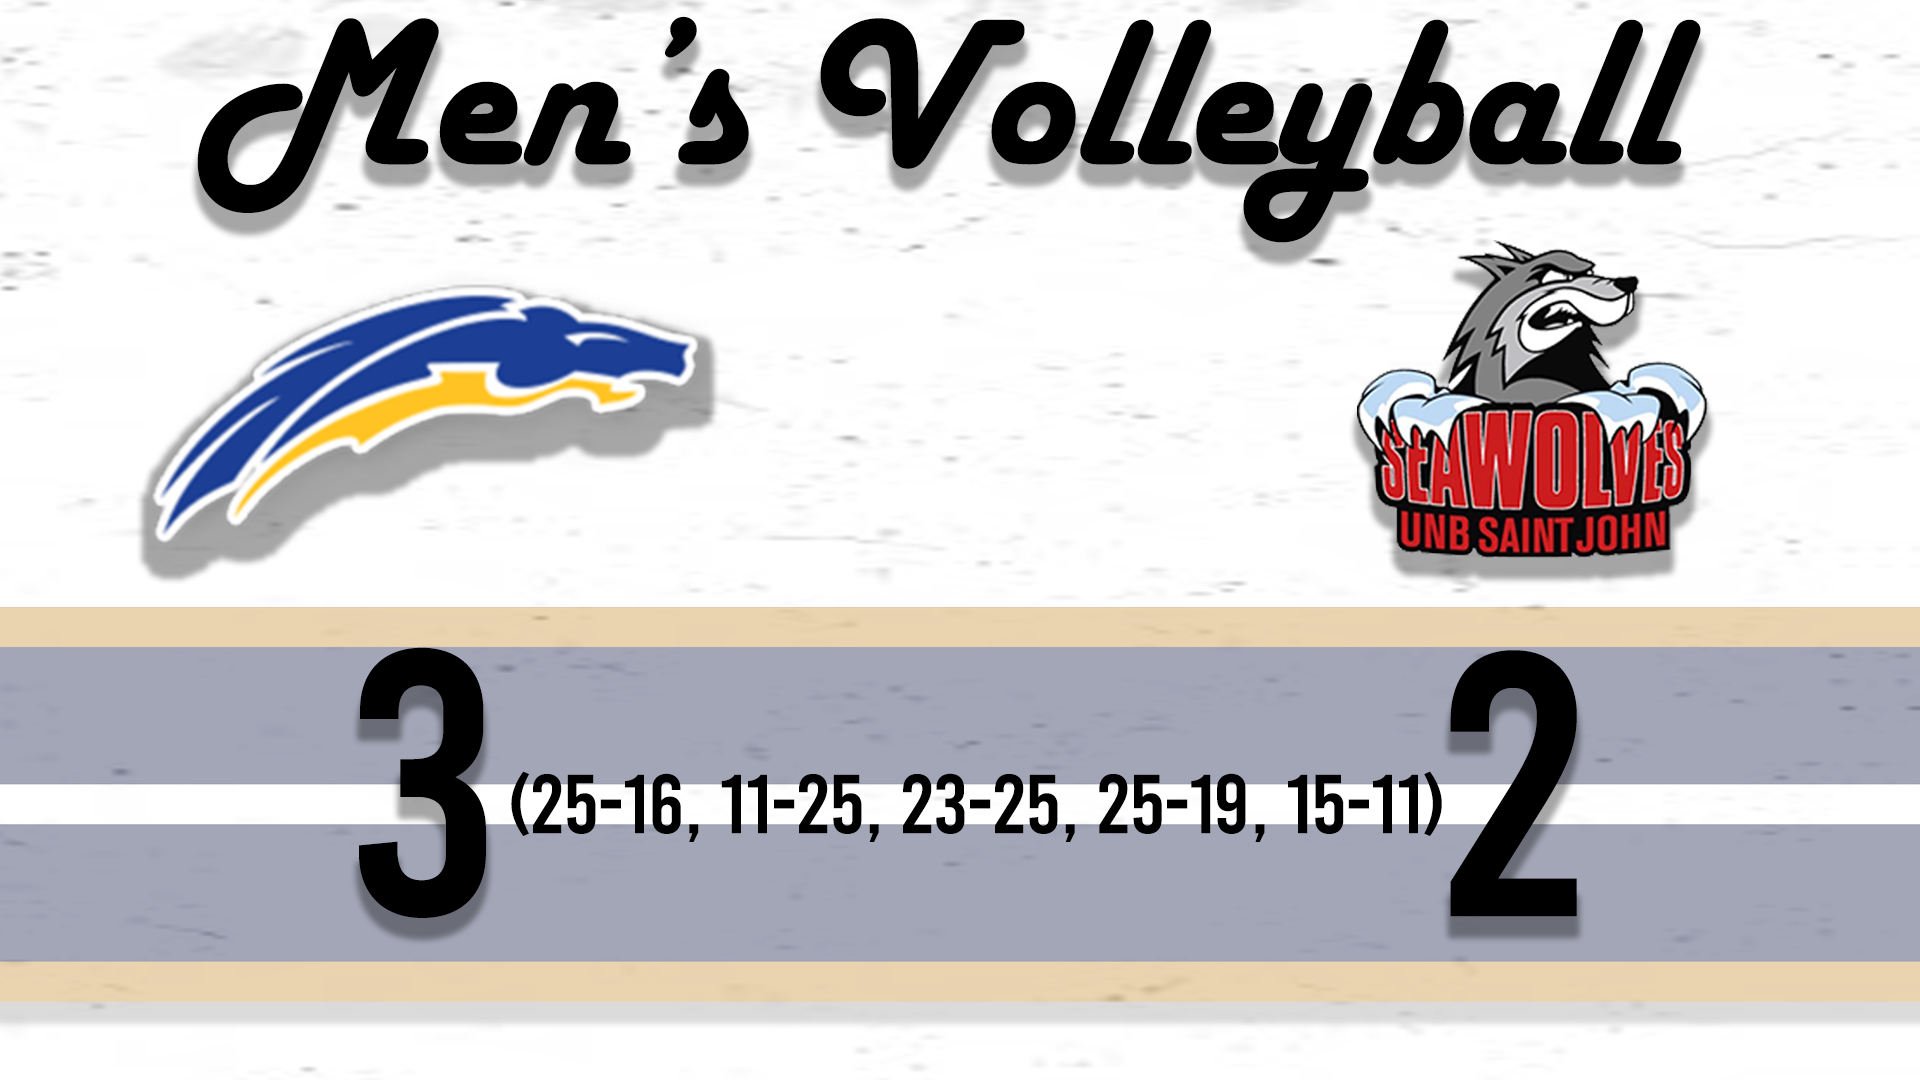 Chargers Get First Win In Program History, Defeat Seawolves 3-2